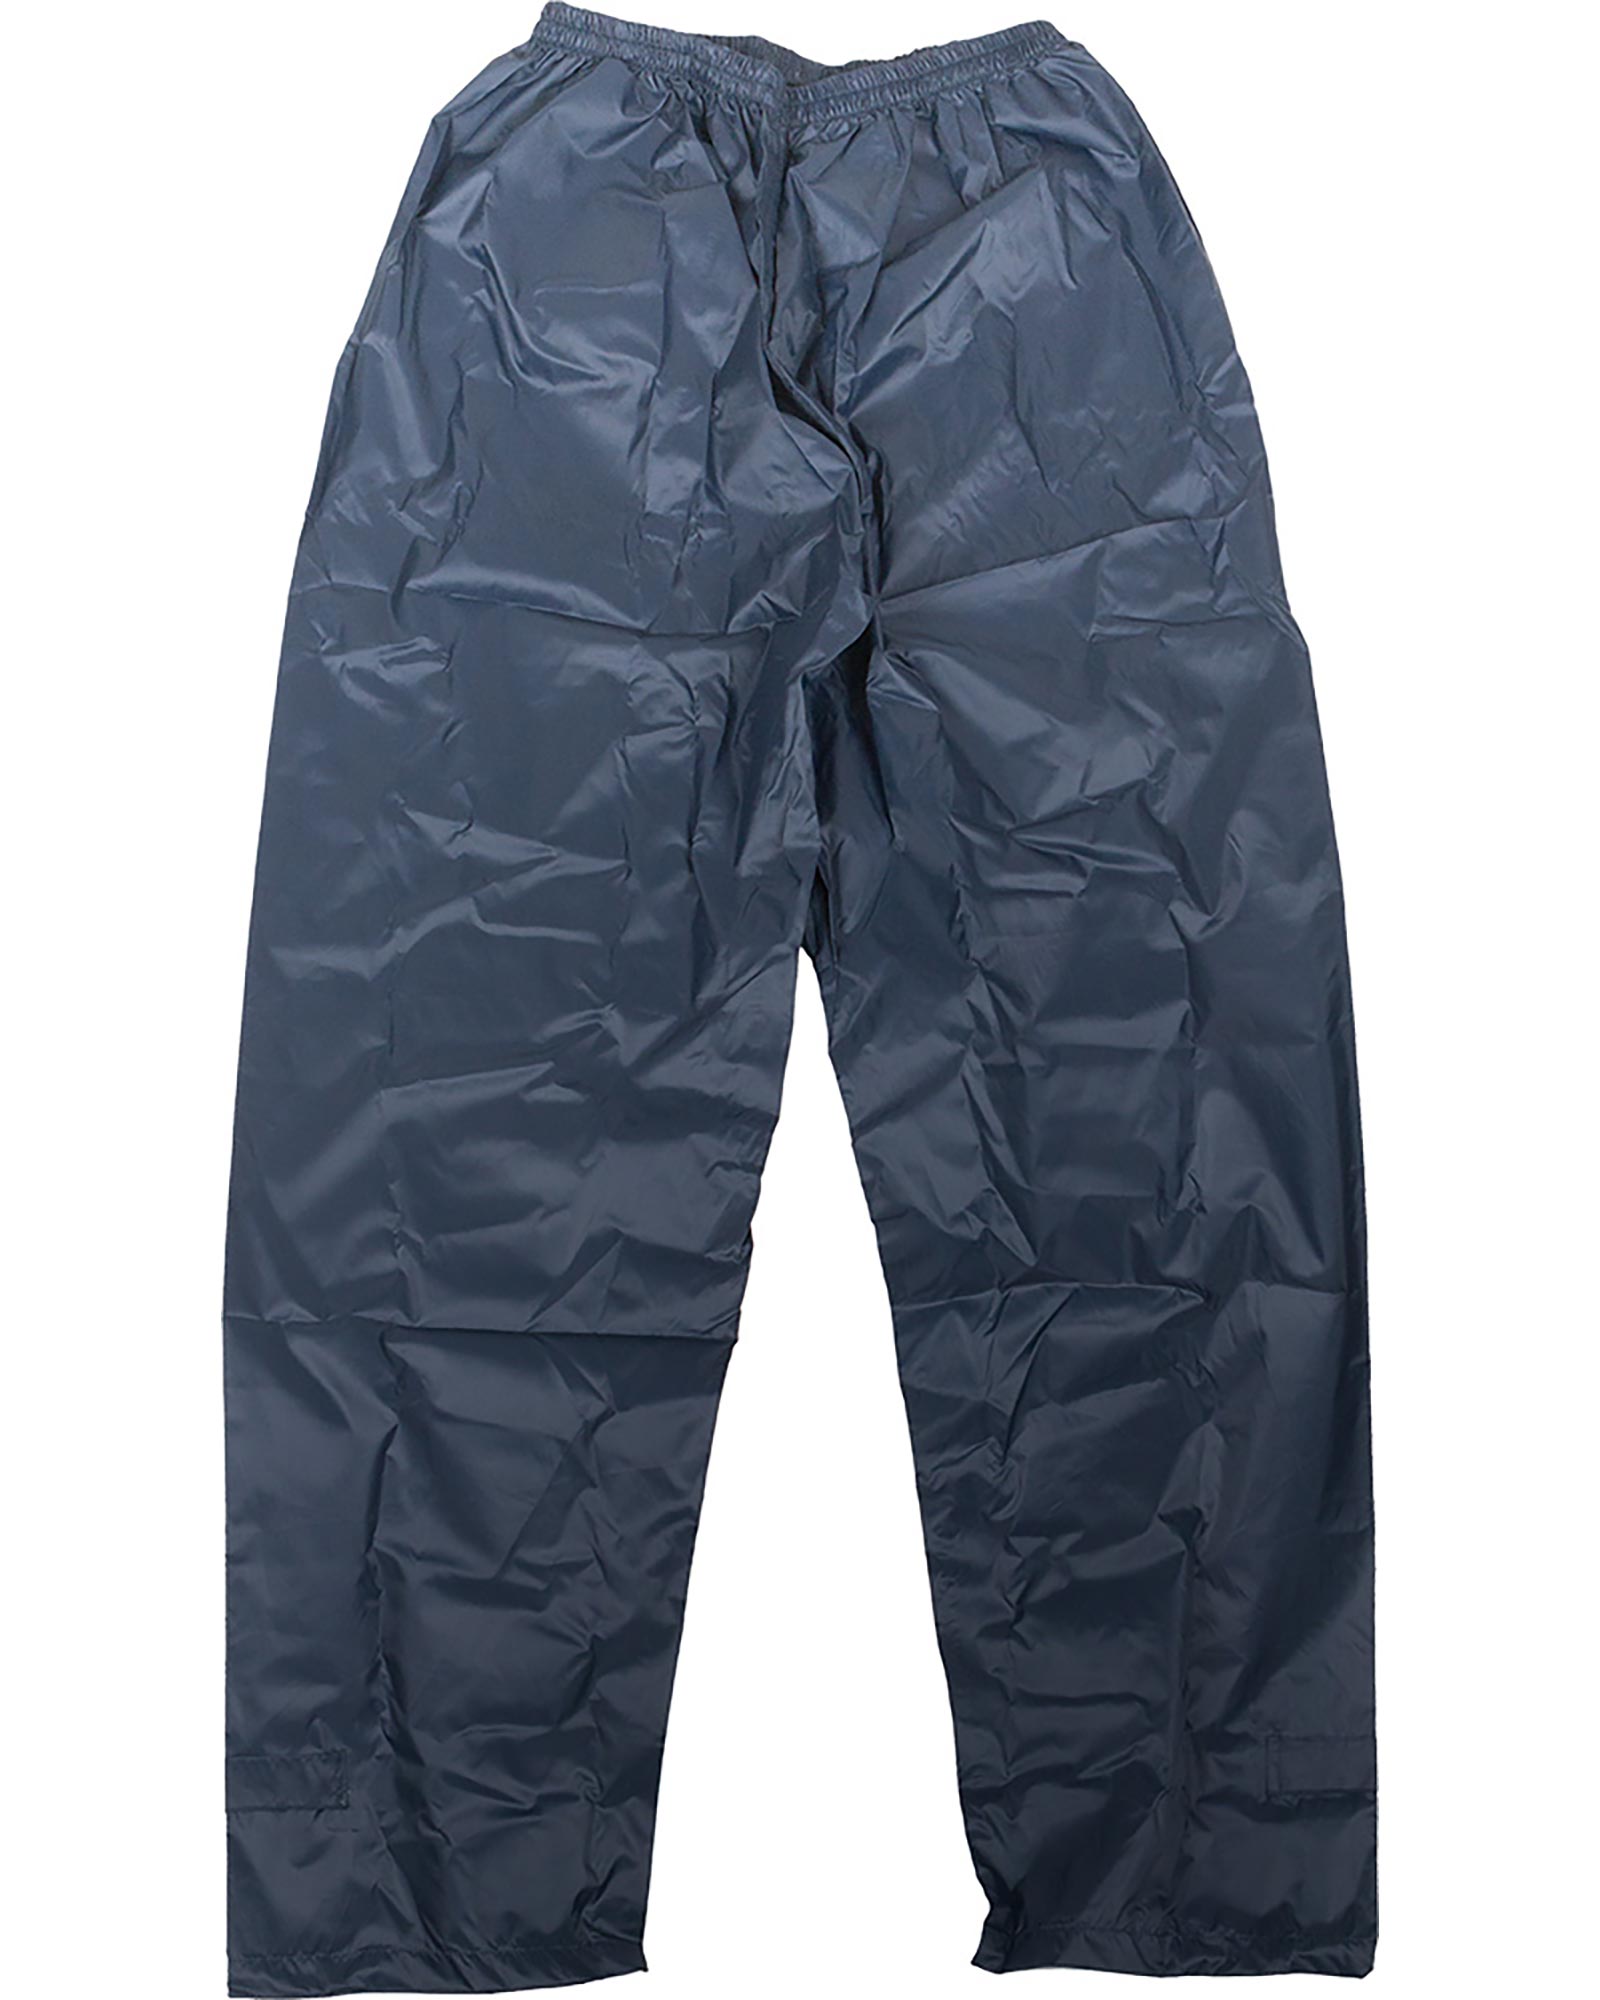 Target Dry Mac in a Sac Adult Packable Waterproof Overtrousers - Navy XS